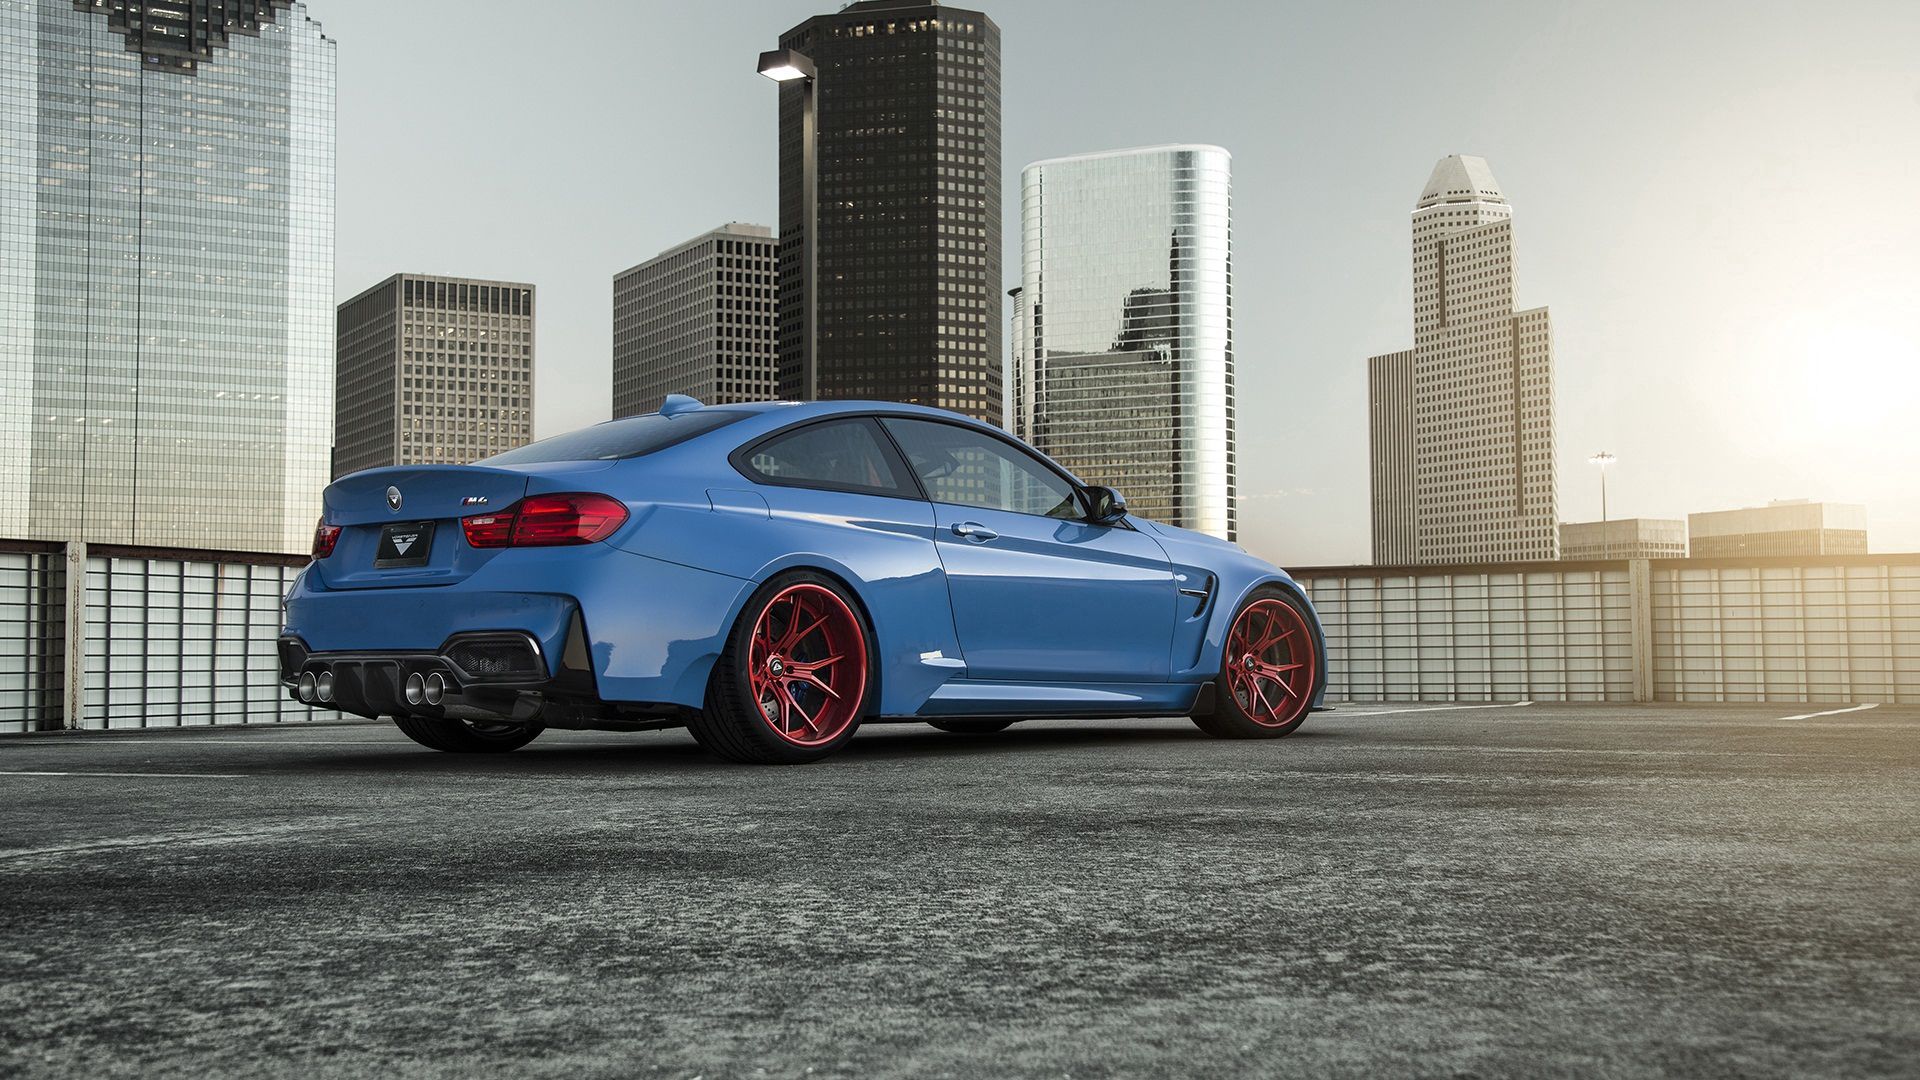 Wallpaper Full HD bmw, cars, blue, back view, rear view, vorsteiner, gtrs4